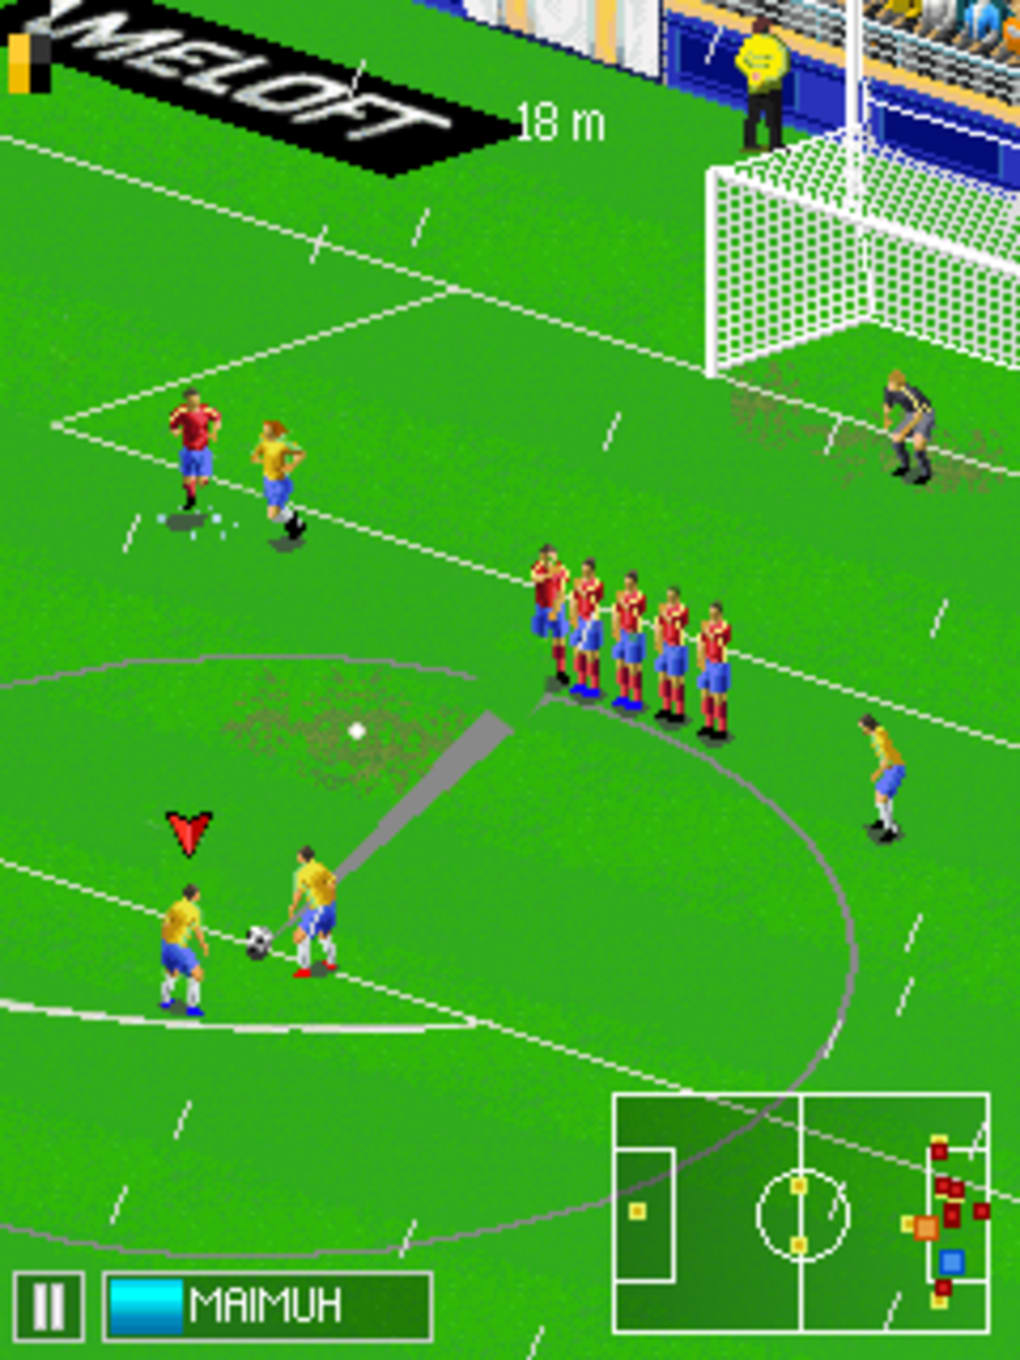 Foot ball game download free jar file for nokia 7